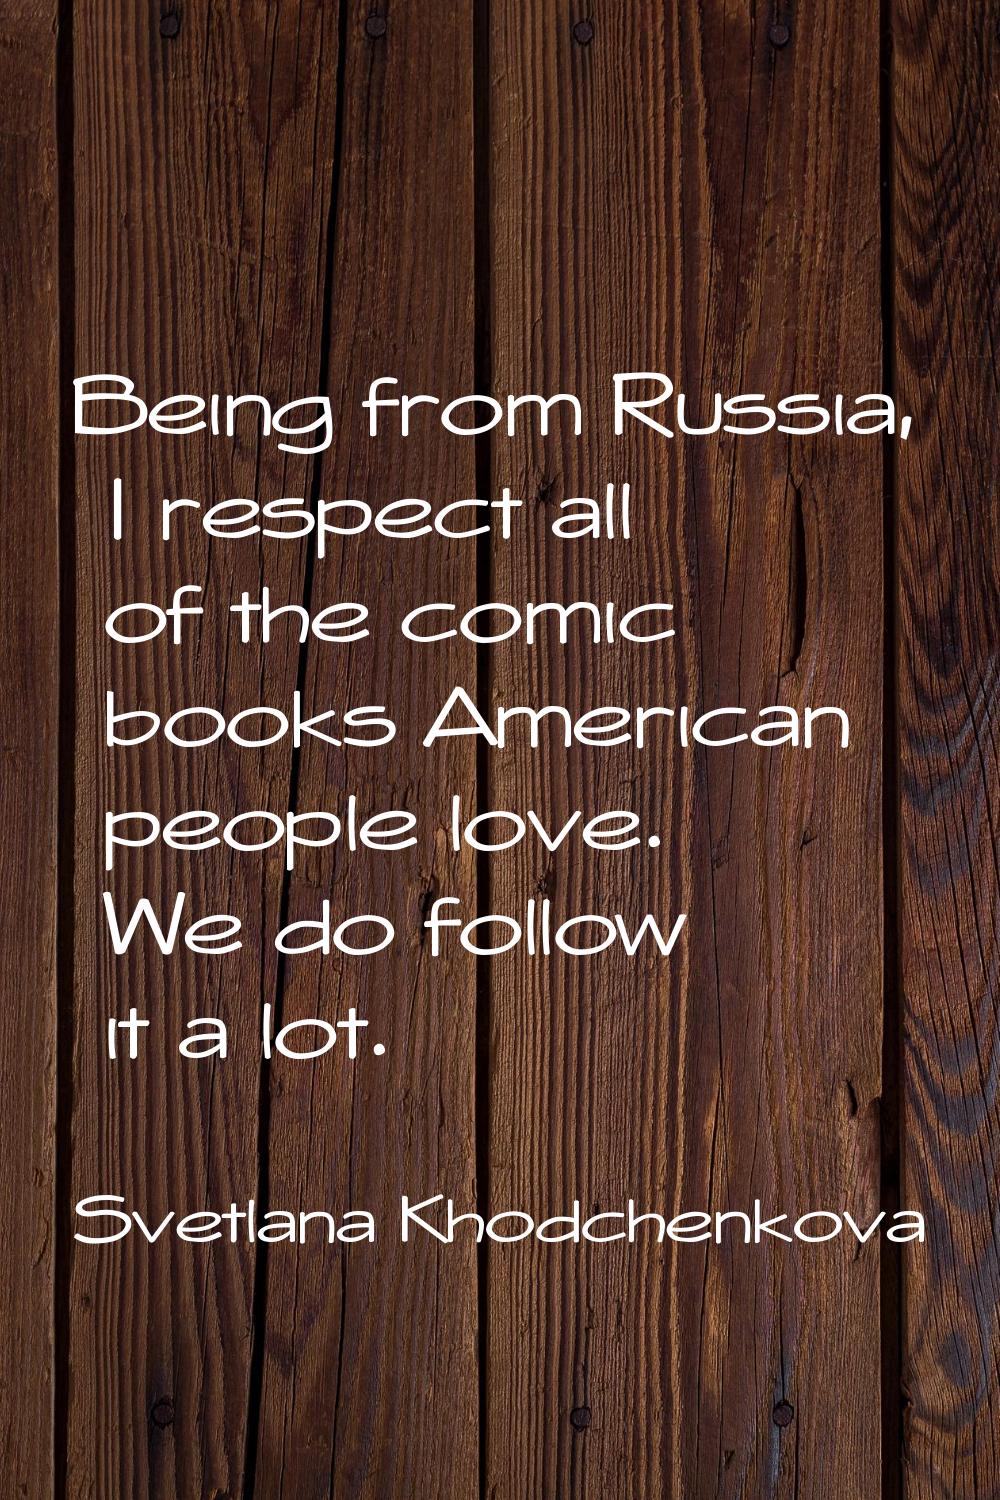 Being from Russia, I respect all of the comic books American people love. We do follow it a lot.